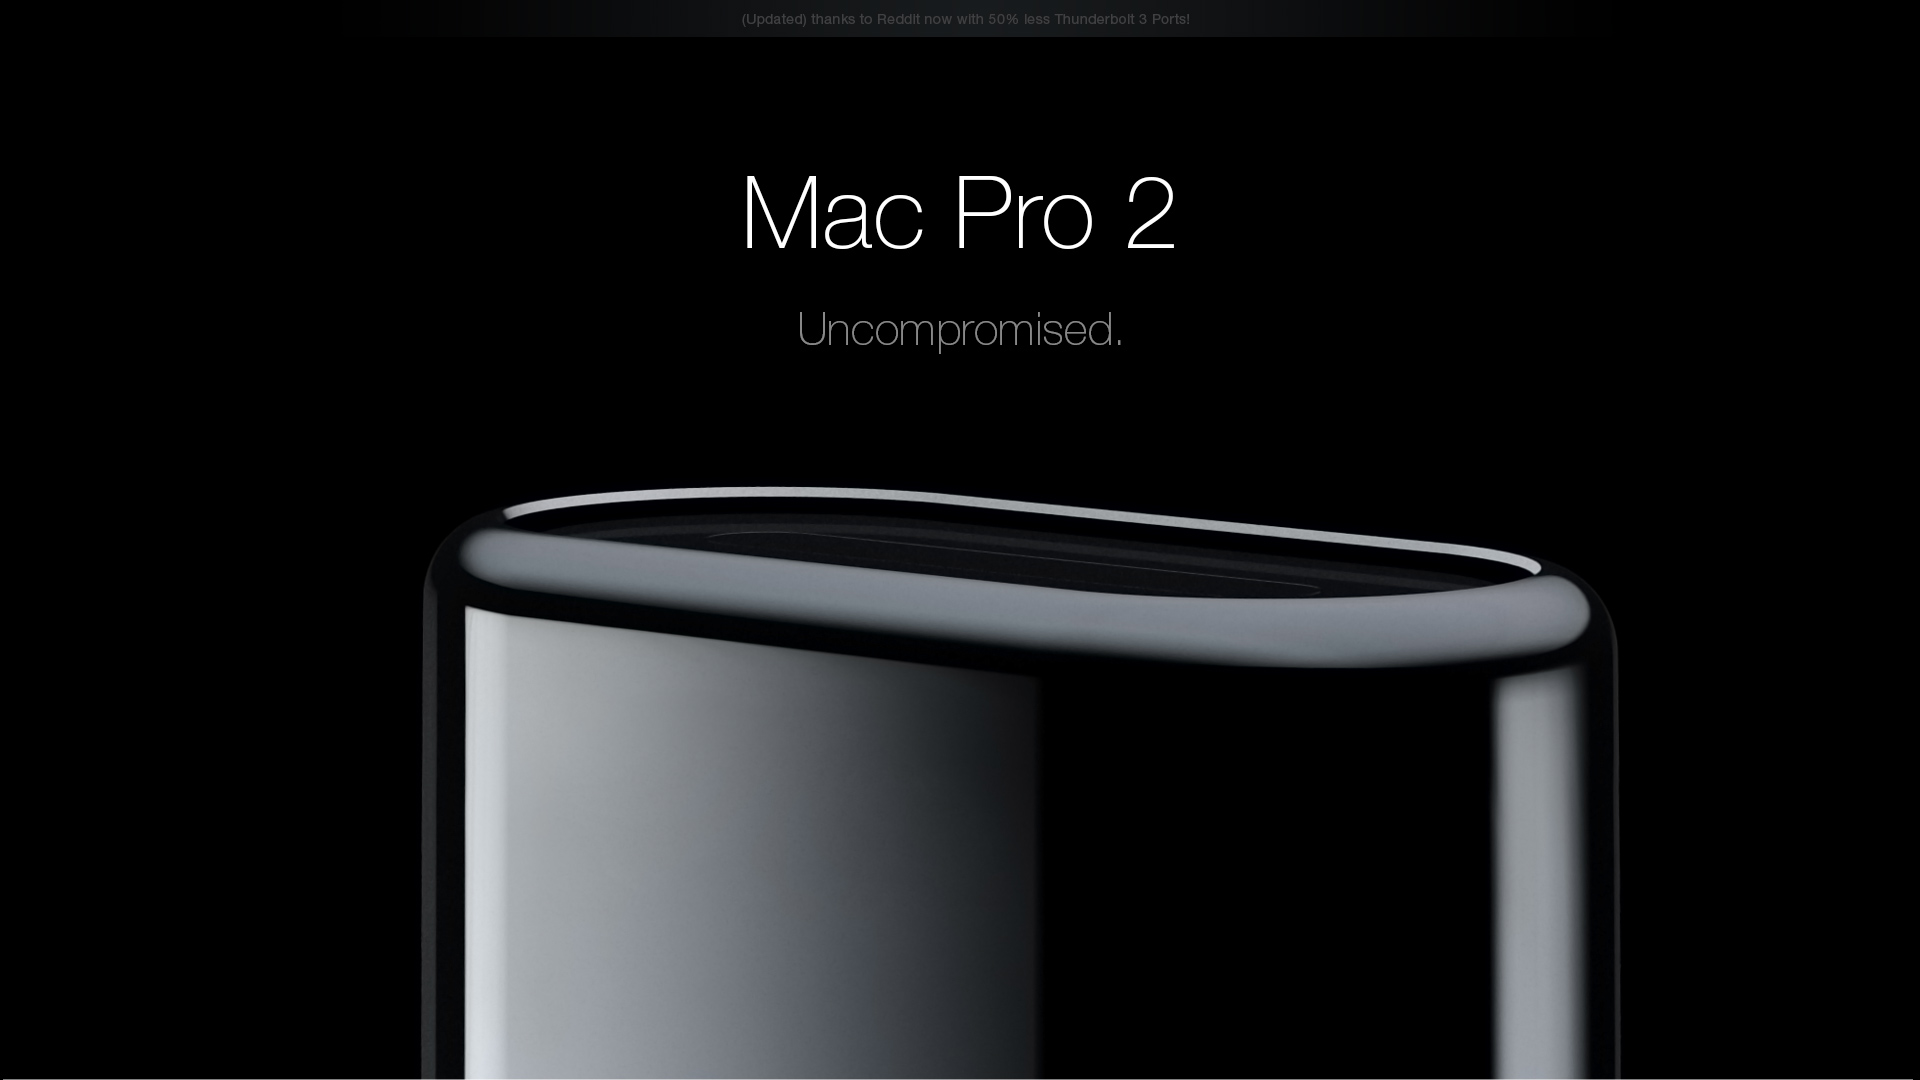 What if Apple patted the current concept of Mac Pro?